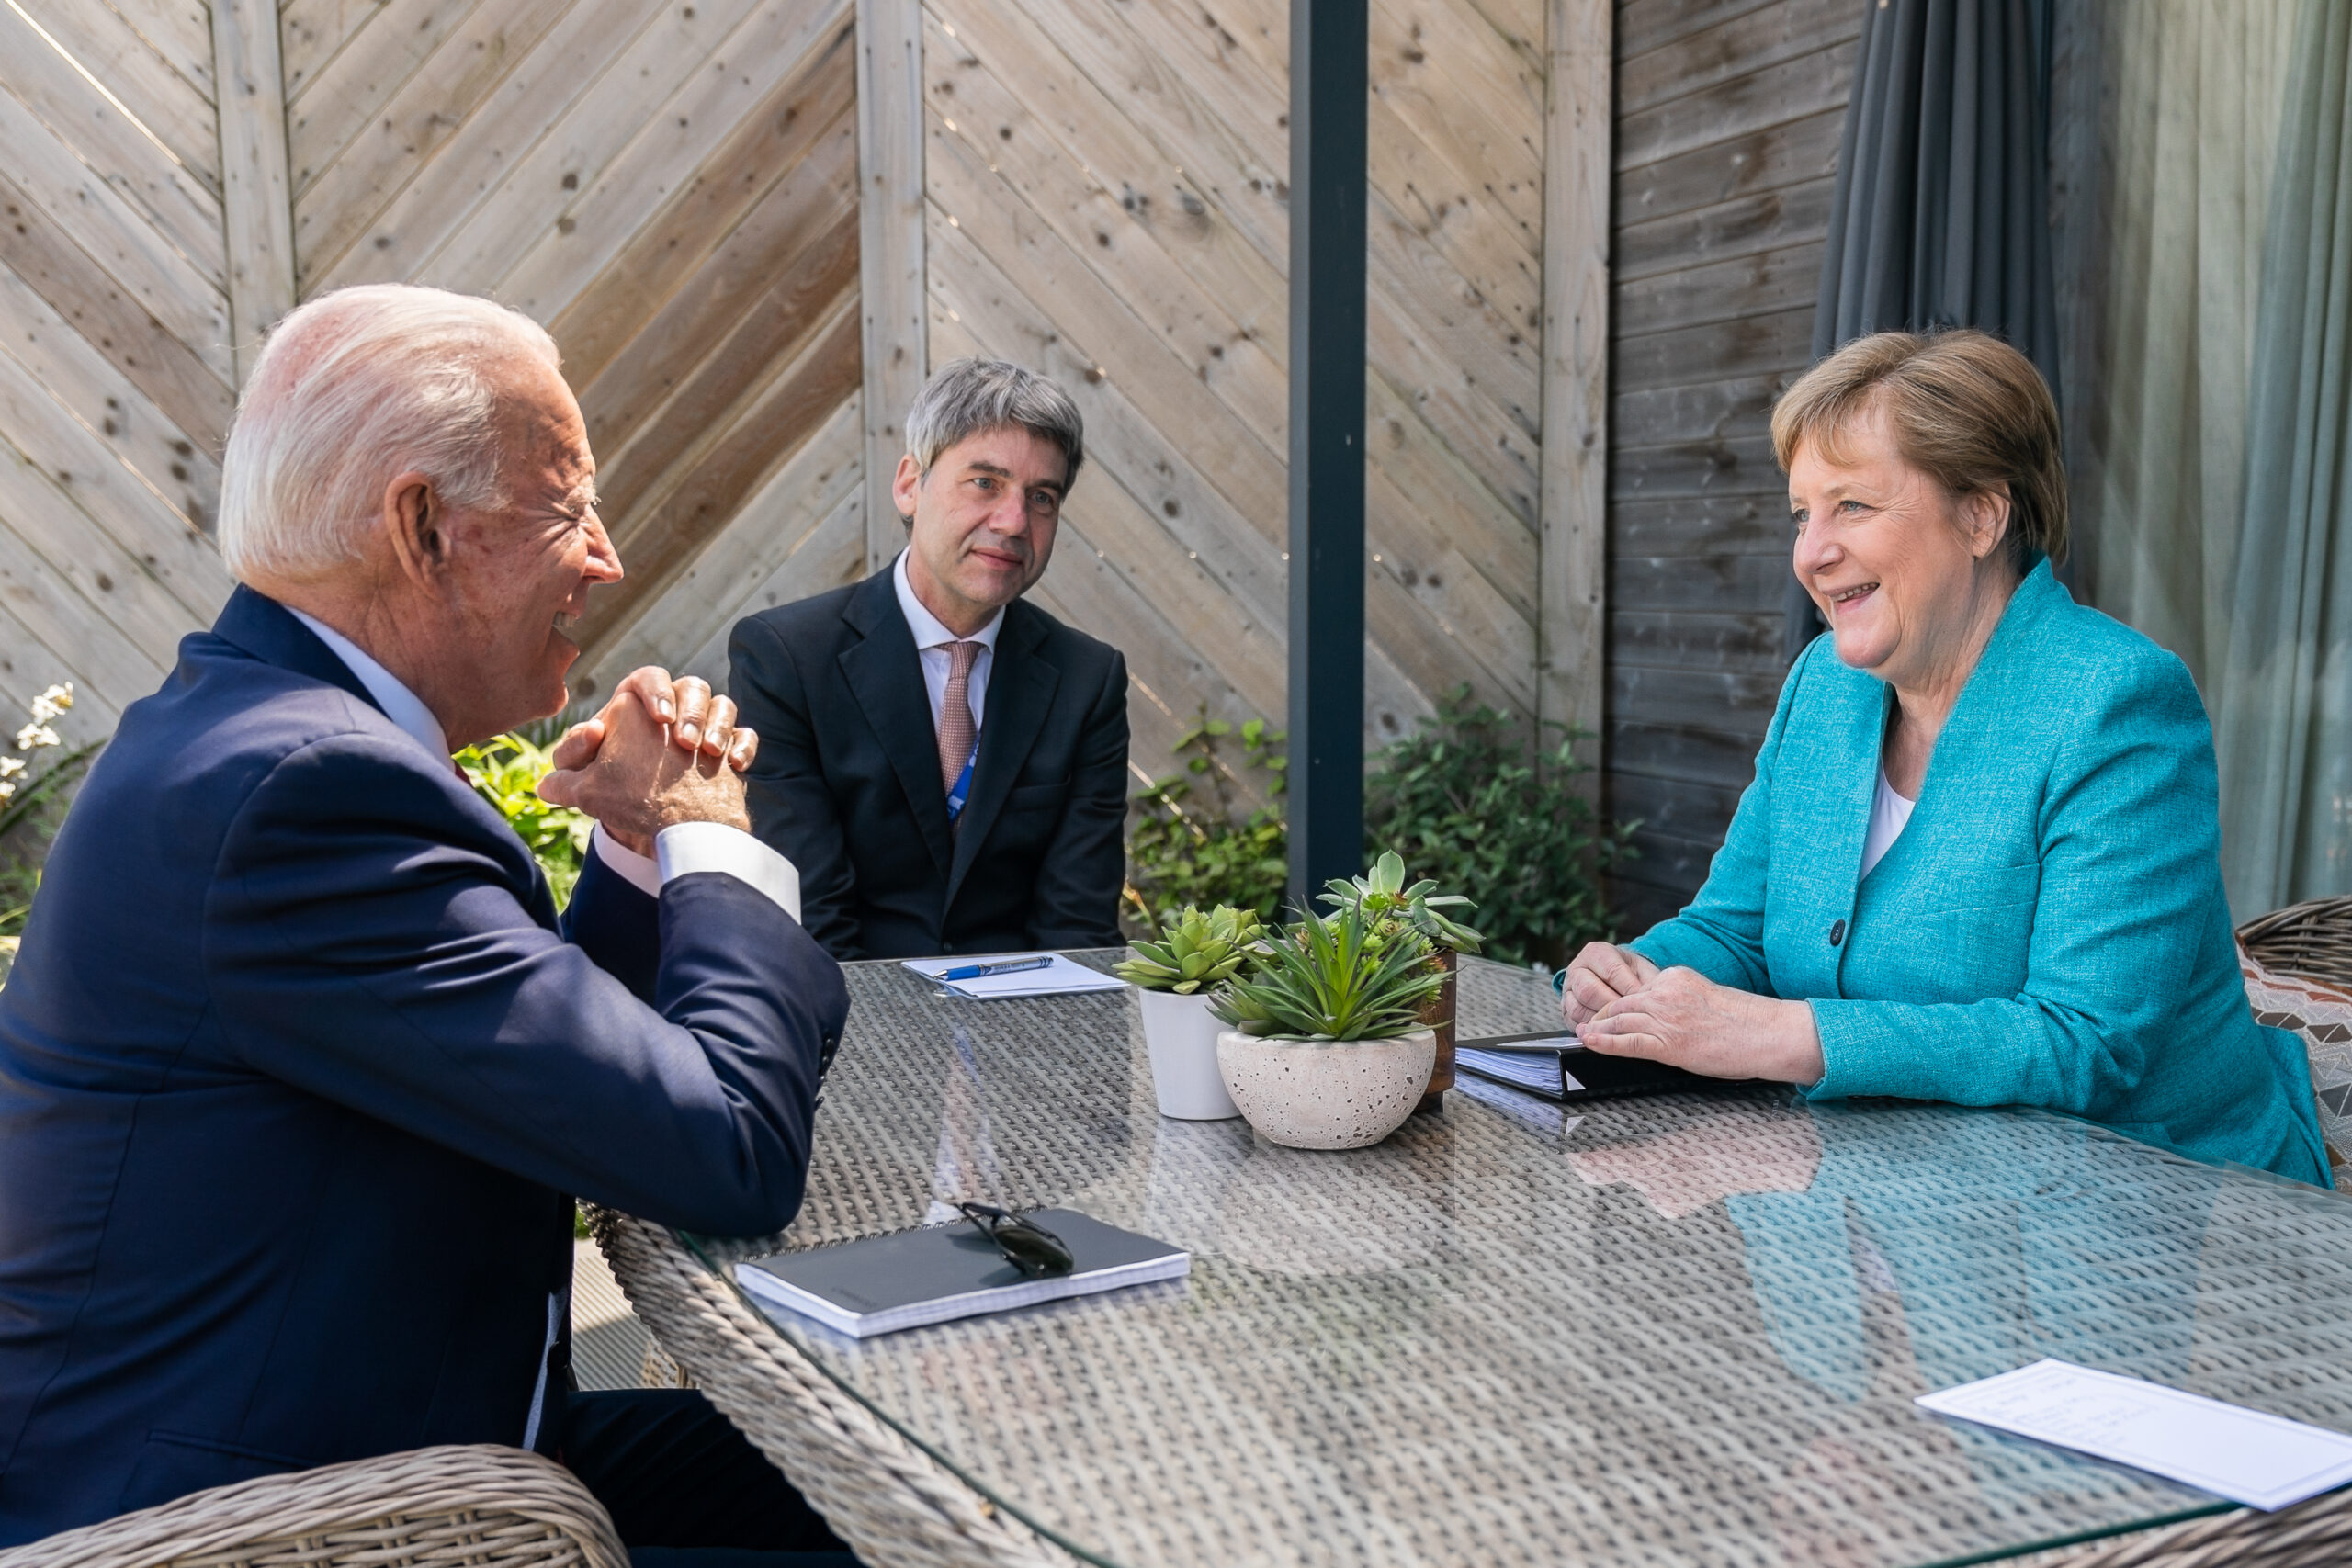 President Joe Biden meets for a brief pull-aside meeting with German Chancellor Angela Markel during the G7 Summit at the Carbis Bay Hotel